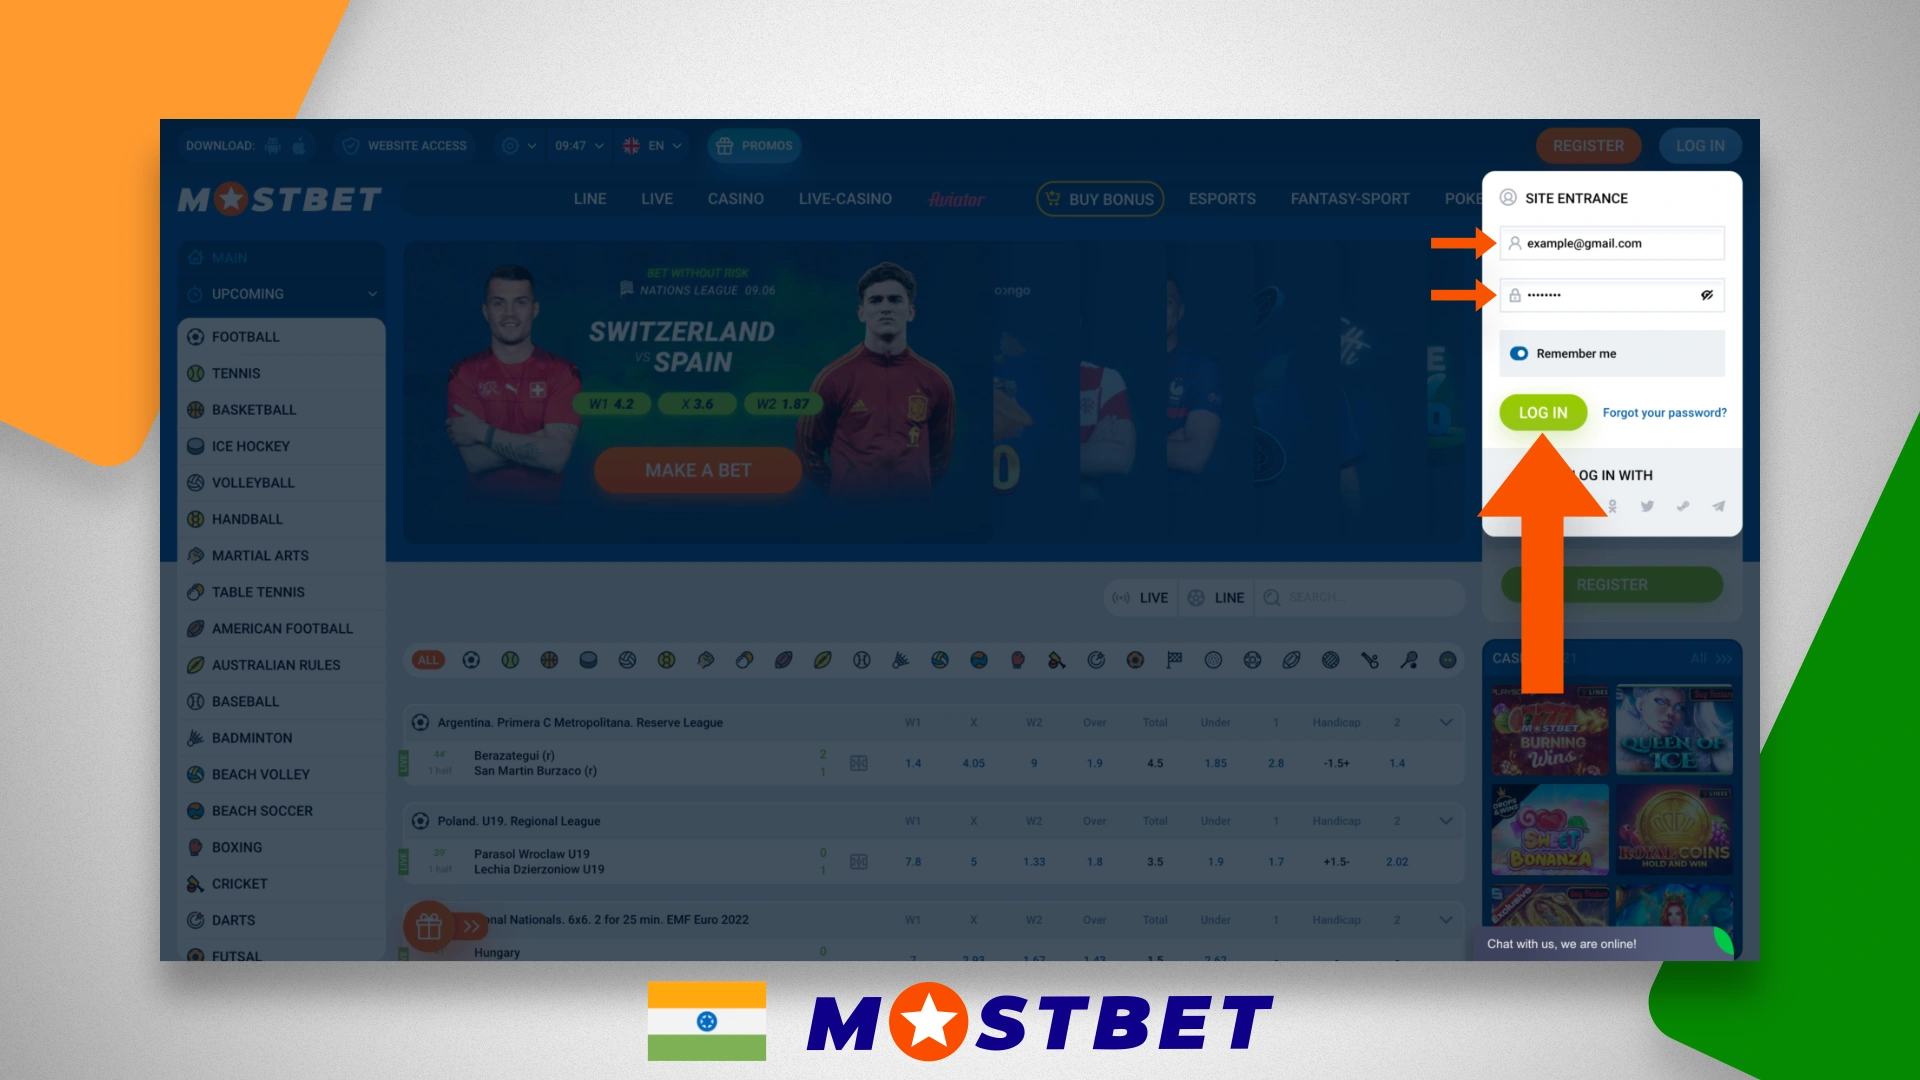 Logging into the personal cabinet on the Mostbet website